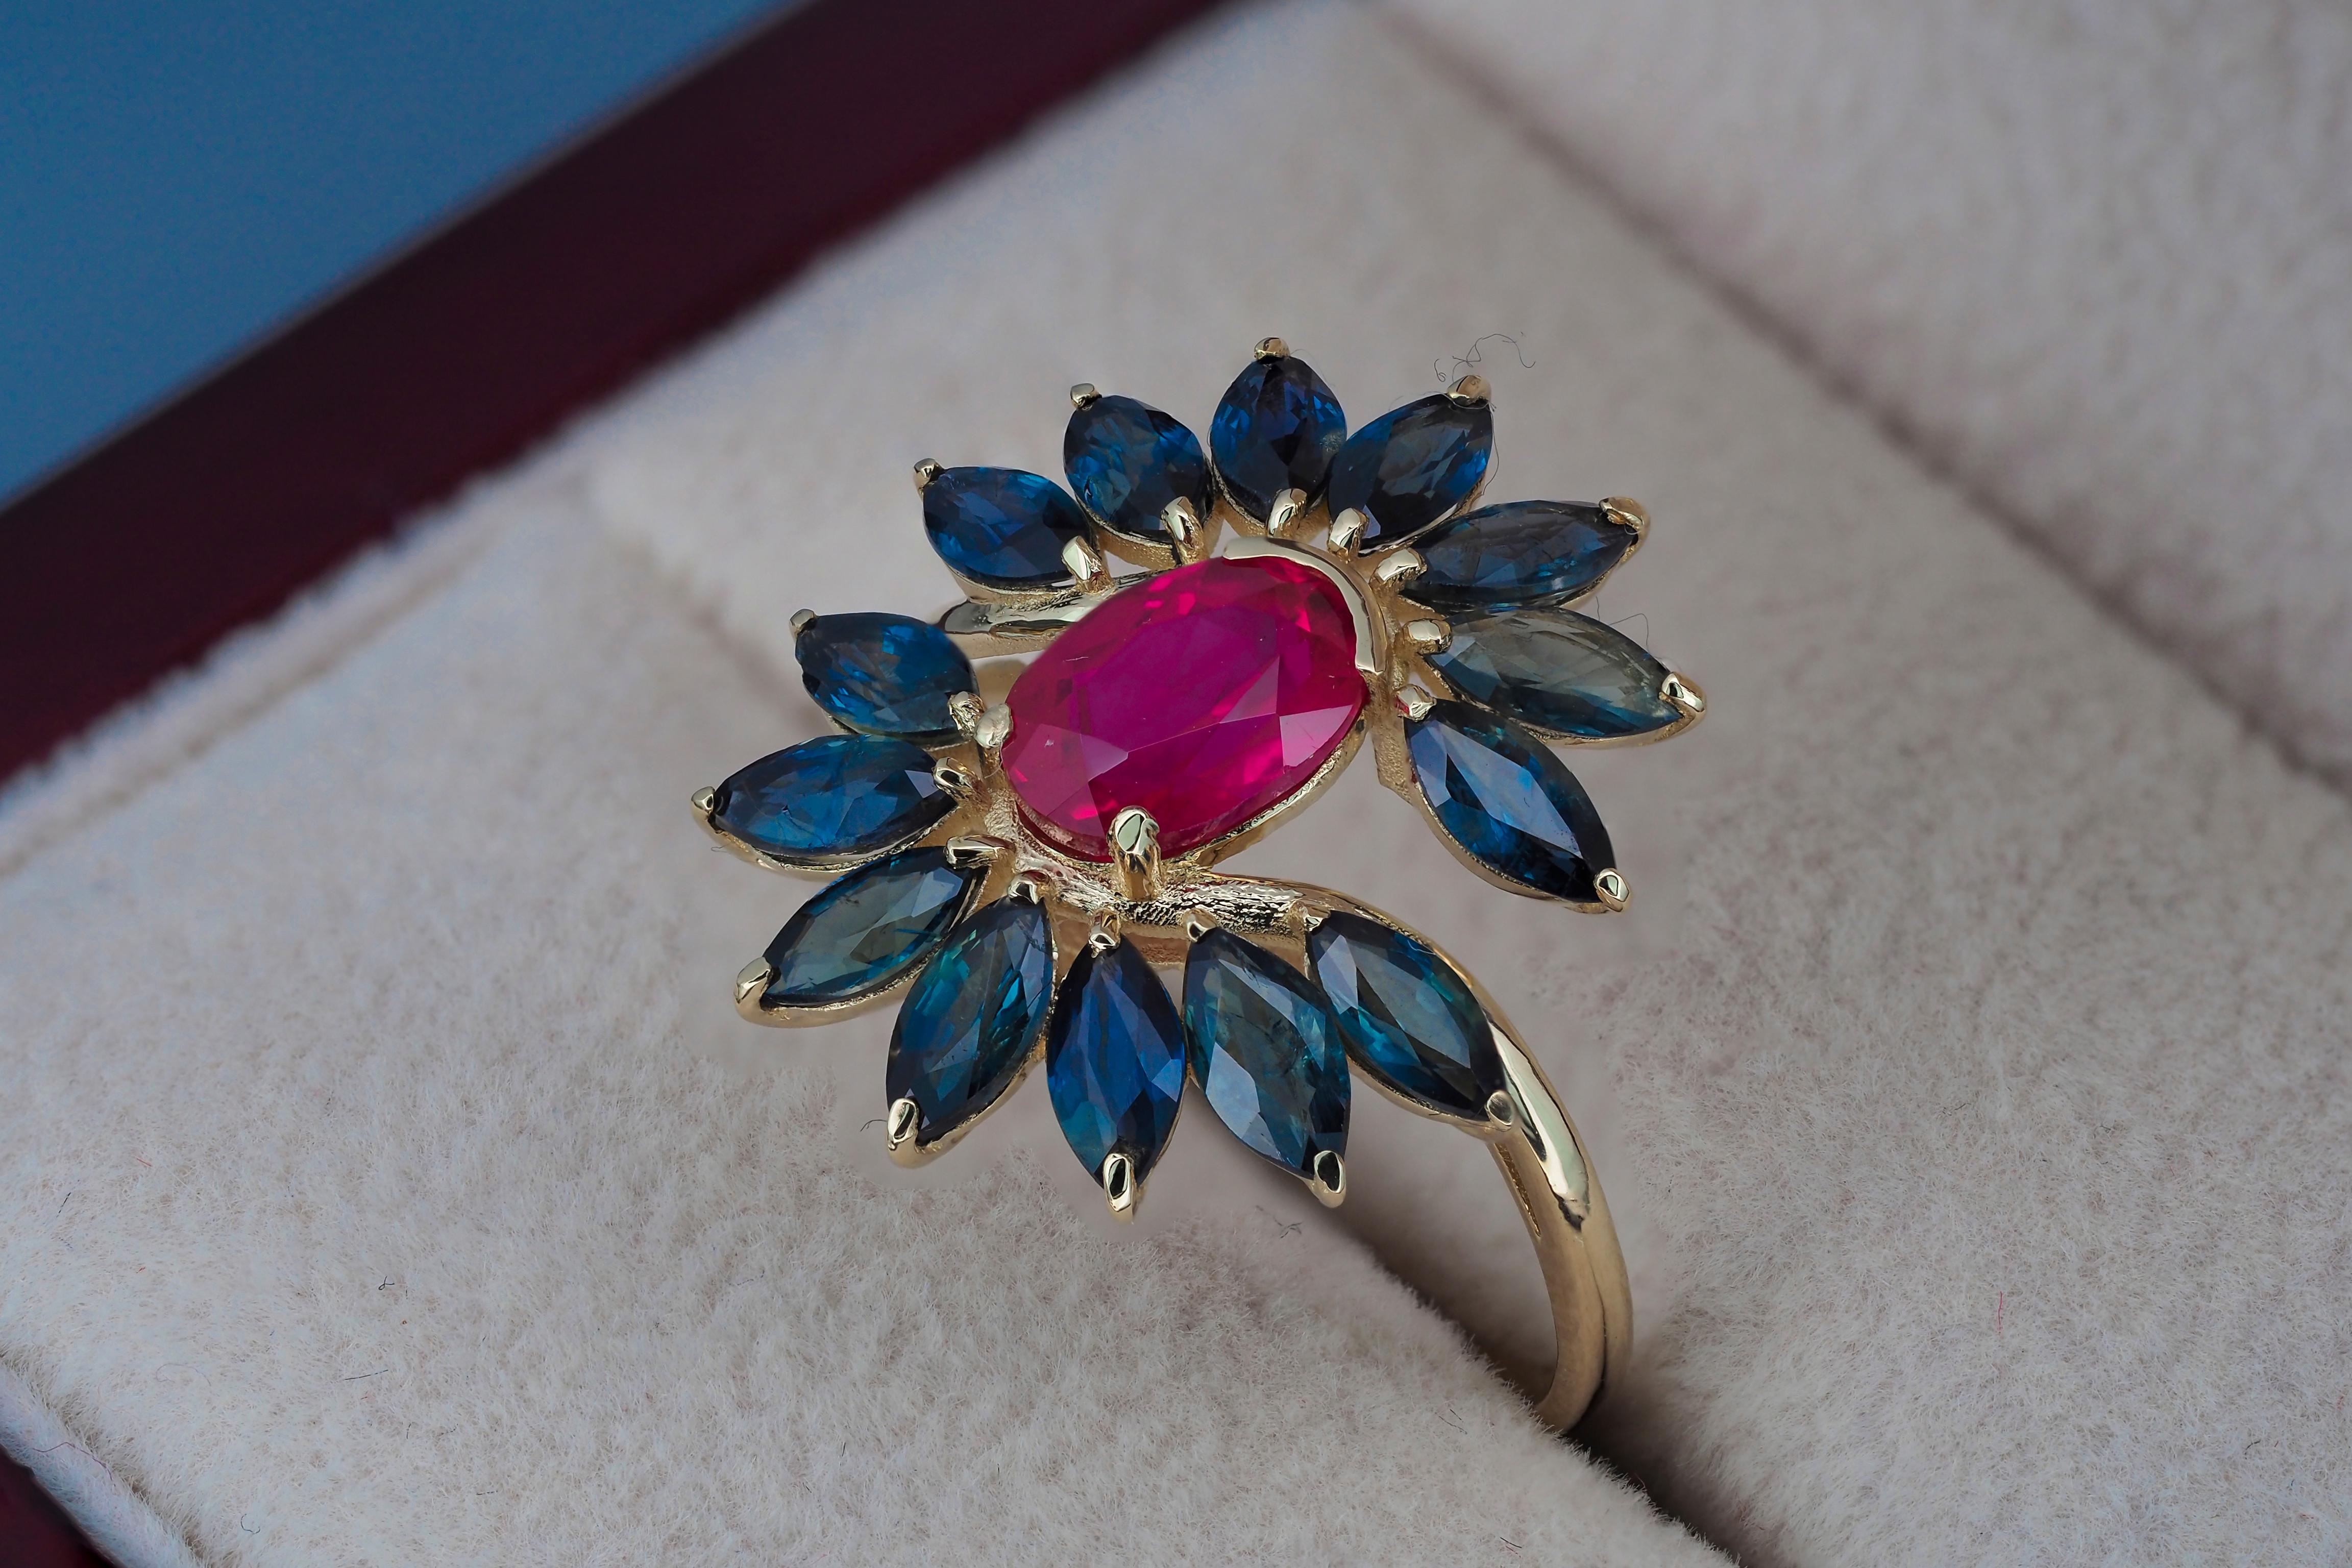 For Sale:  Ruby ring in 14k gold. Sapphire 14k gold ring. Ruby and sapphire 14k gold ring 6